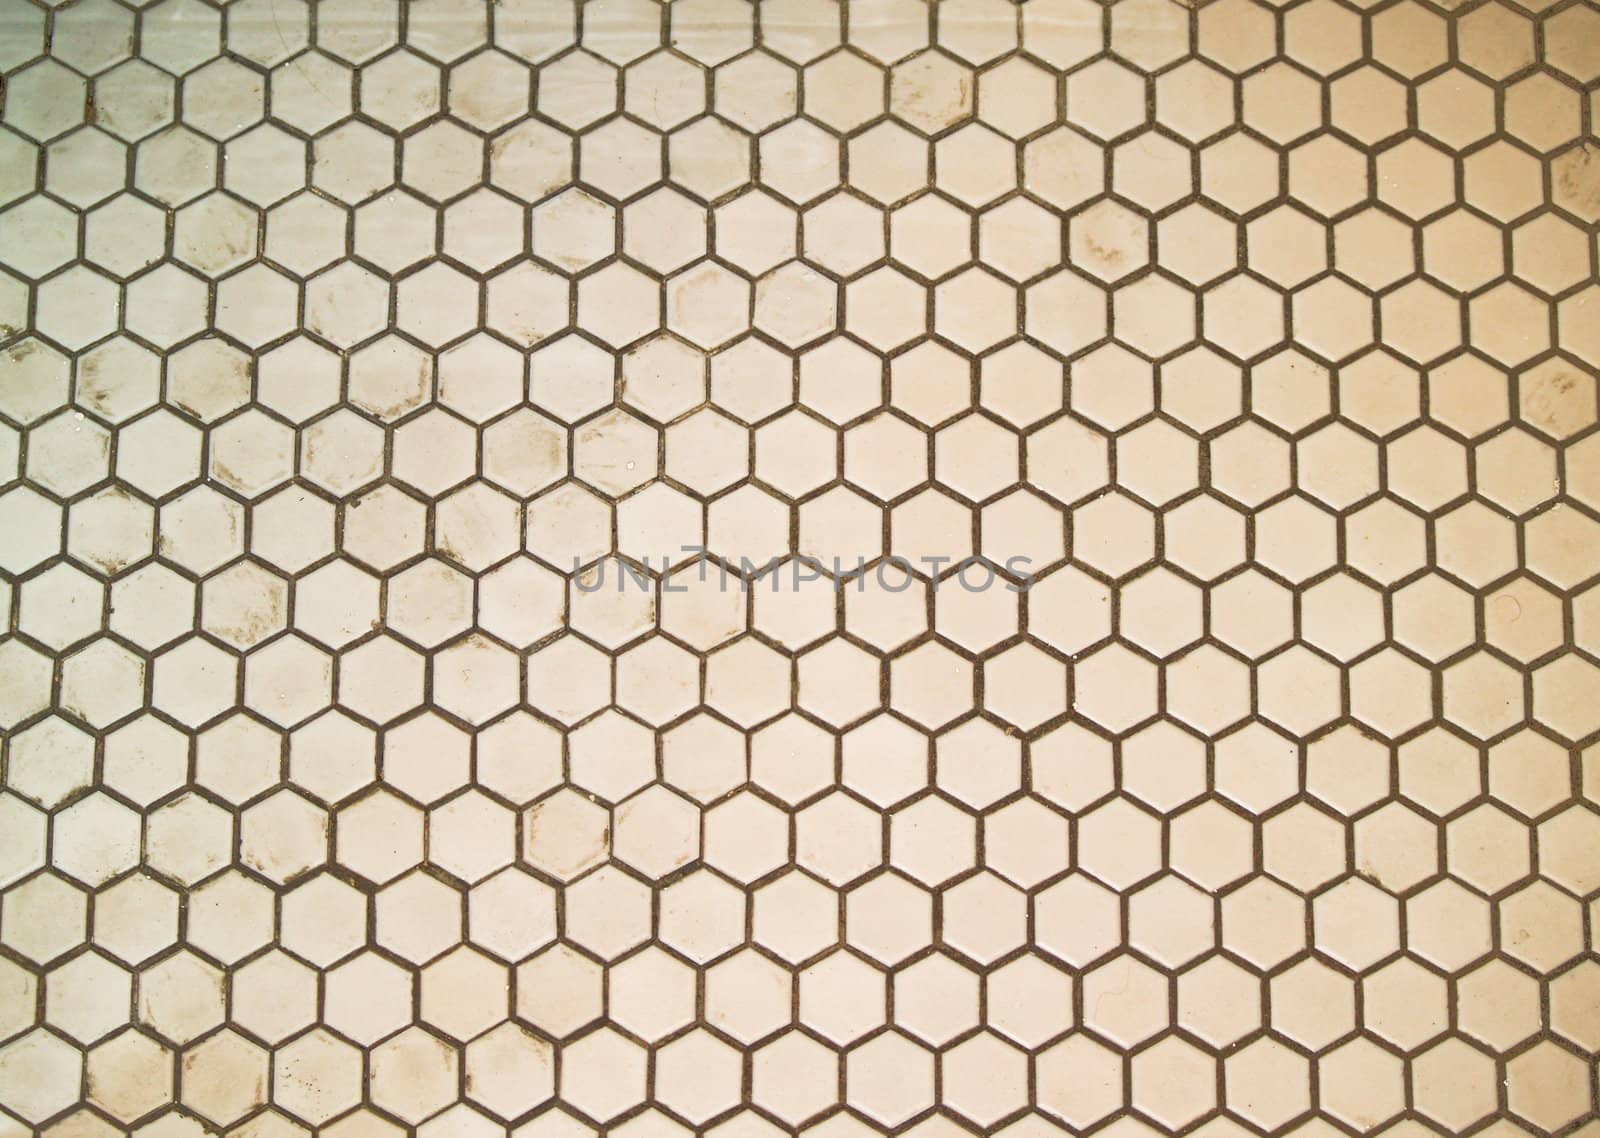 Filthy Subway Tile by chaosmediamgt